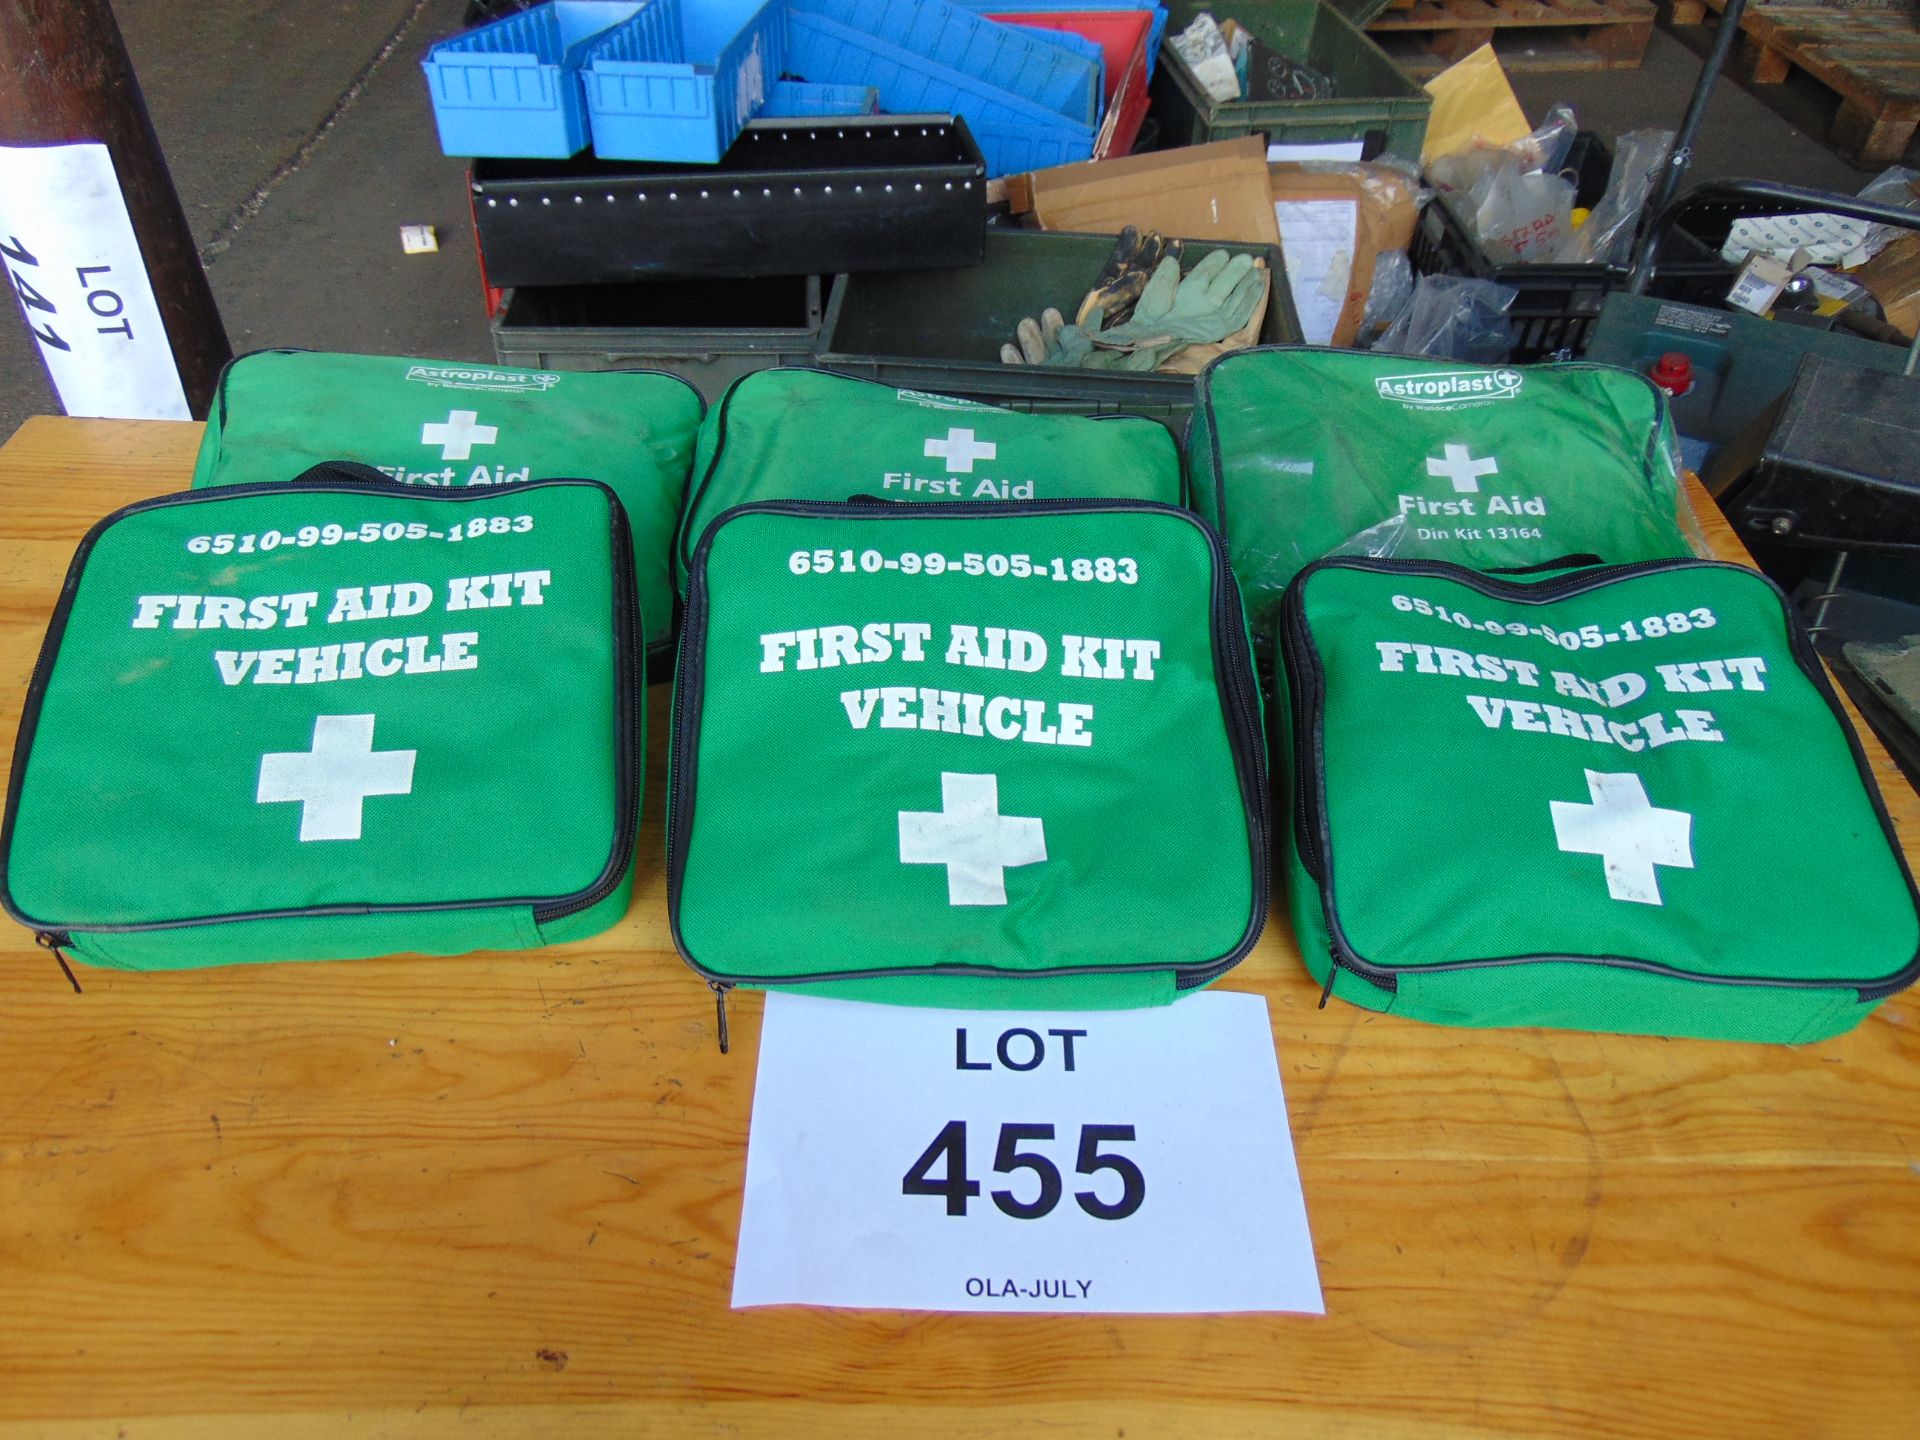 6 x Unissued Land Rover First Aid Kits as shown